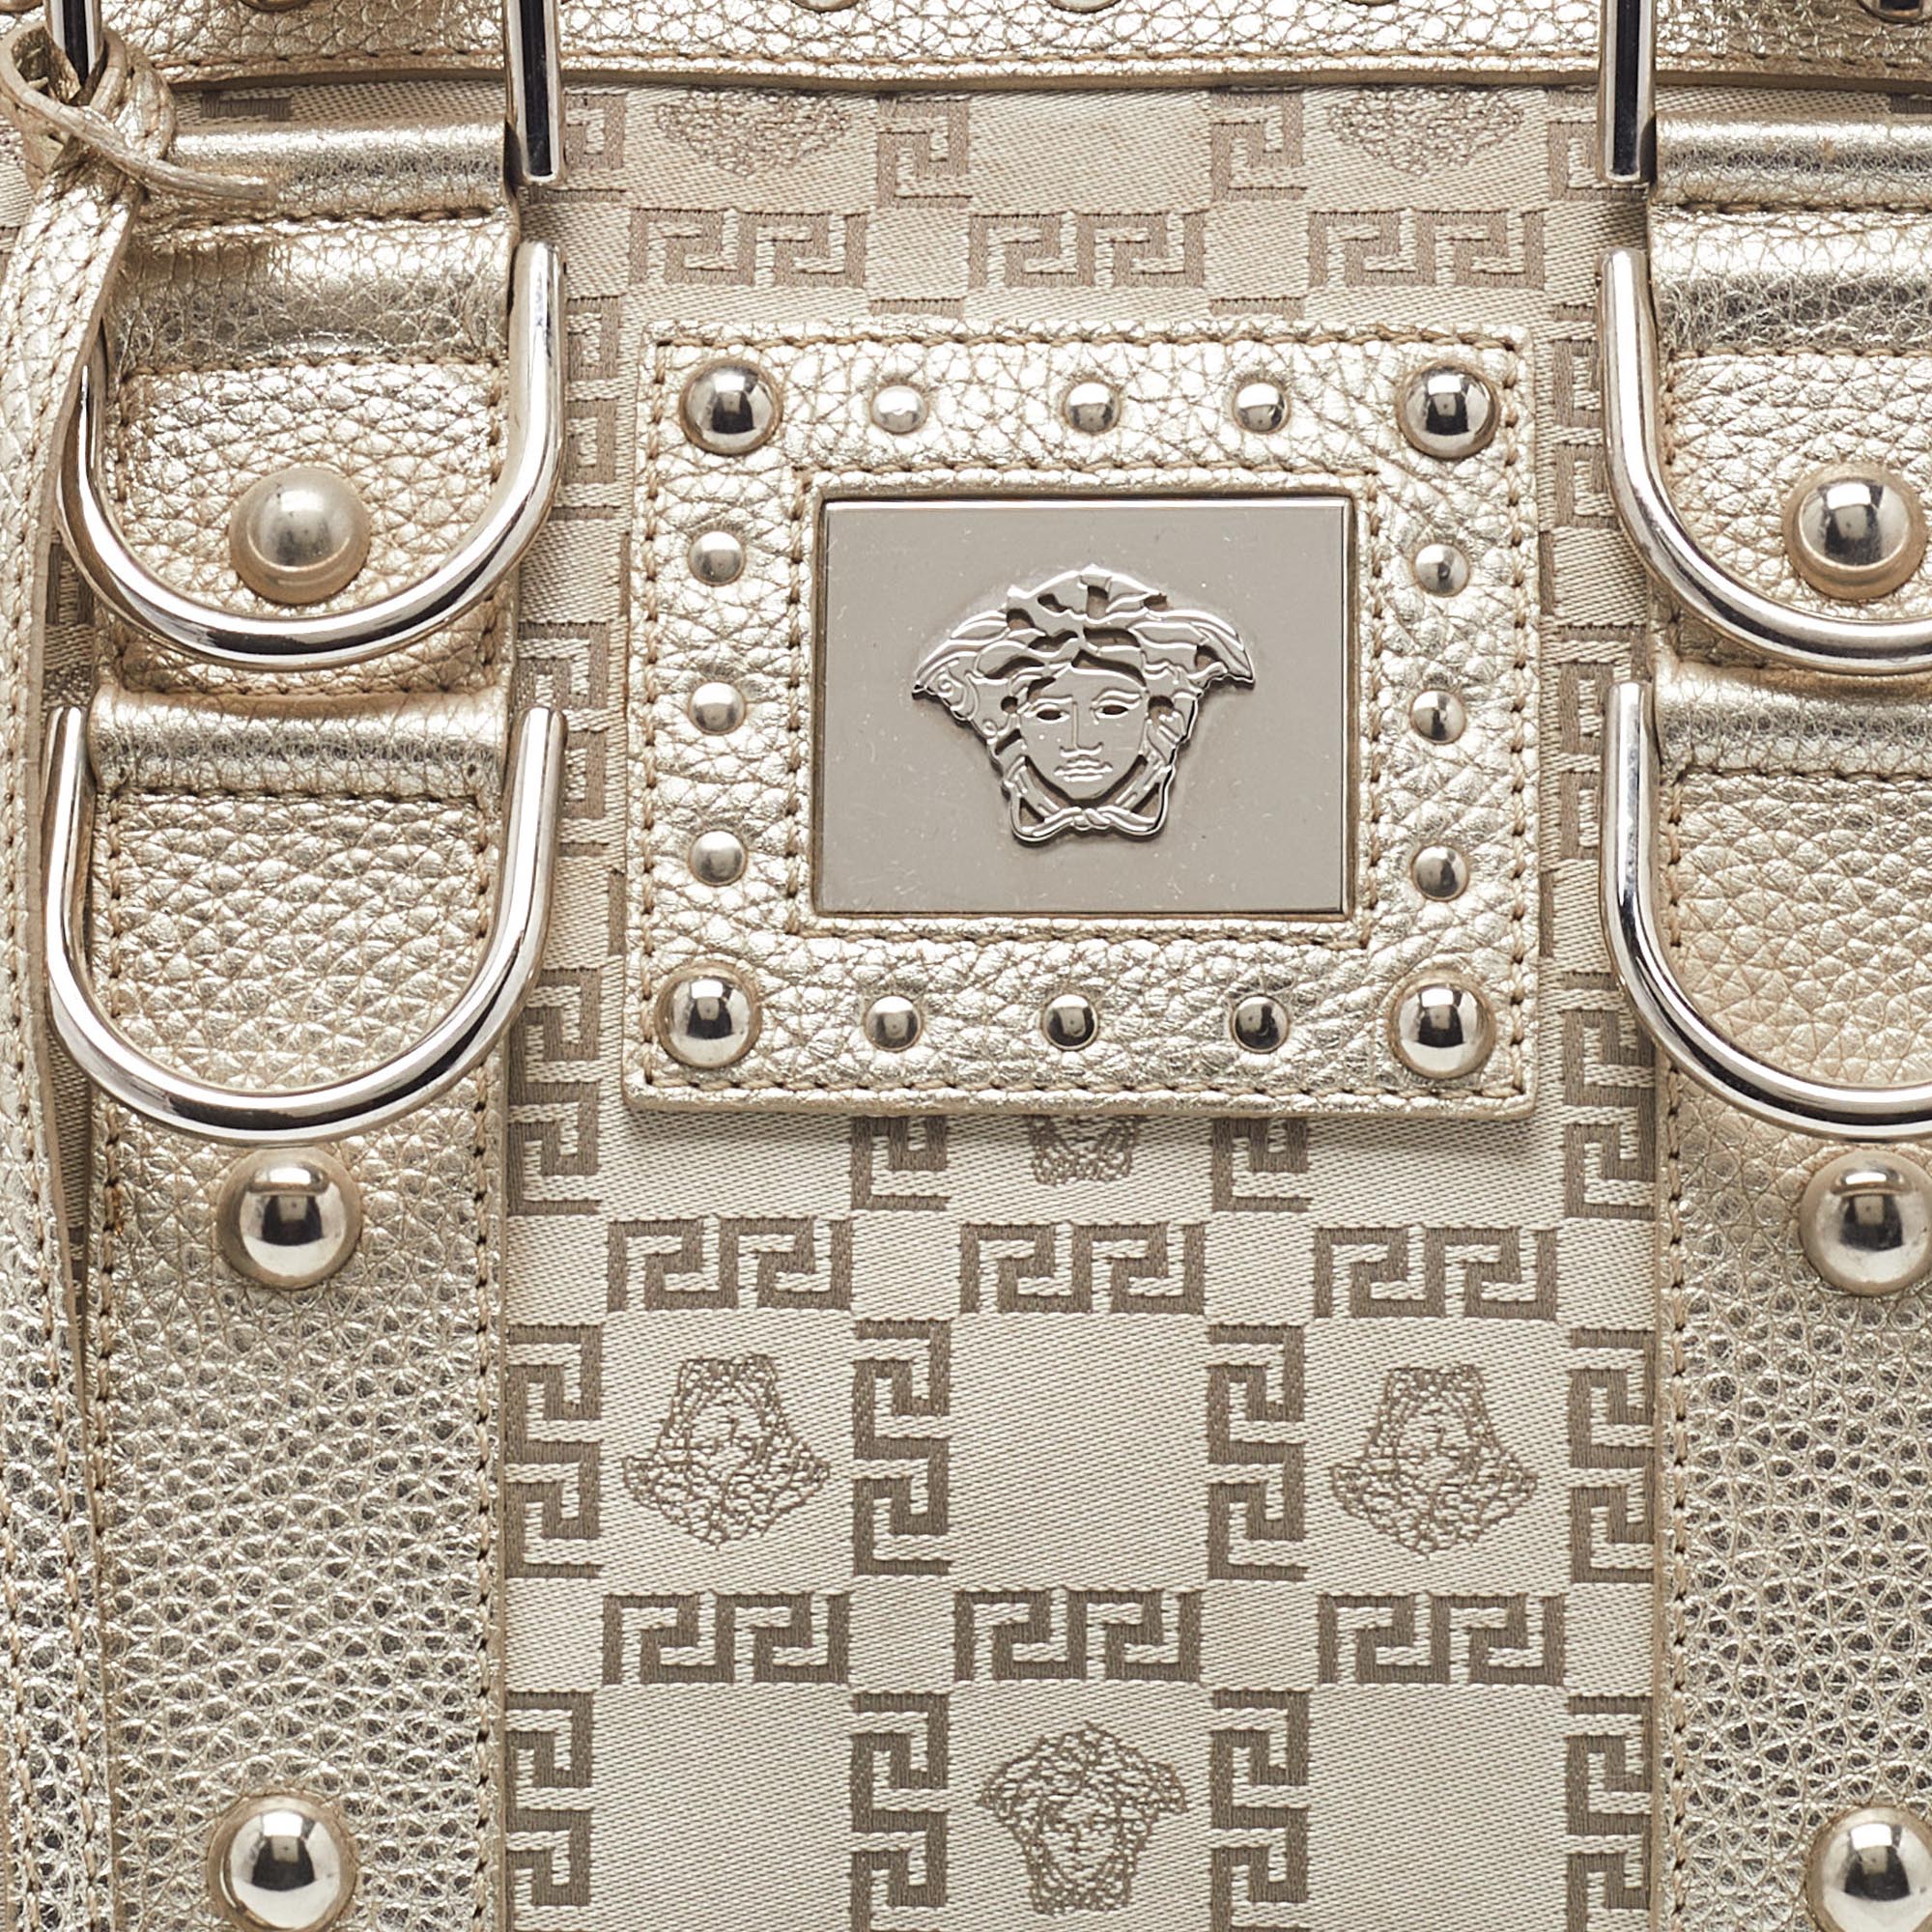 Versace Metallic Gold/Beige Signature Fabric And Leather Snap Out Of It Satchel